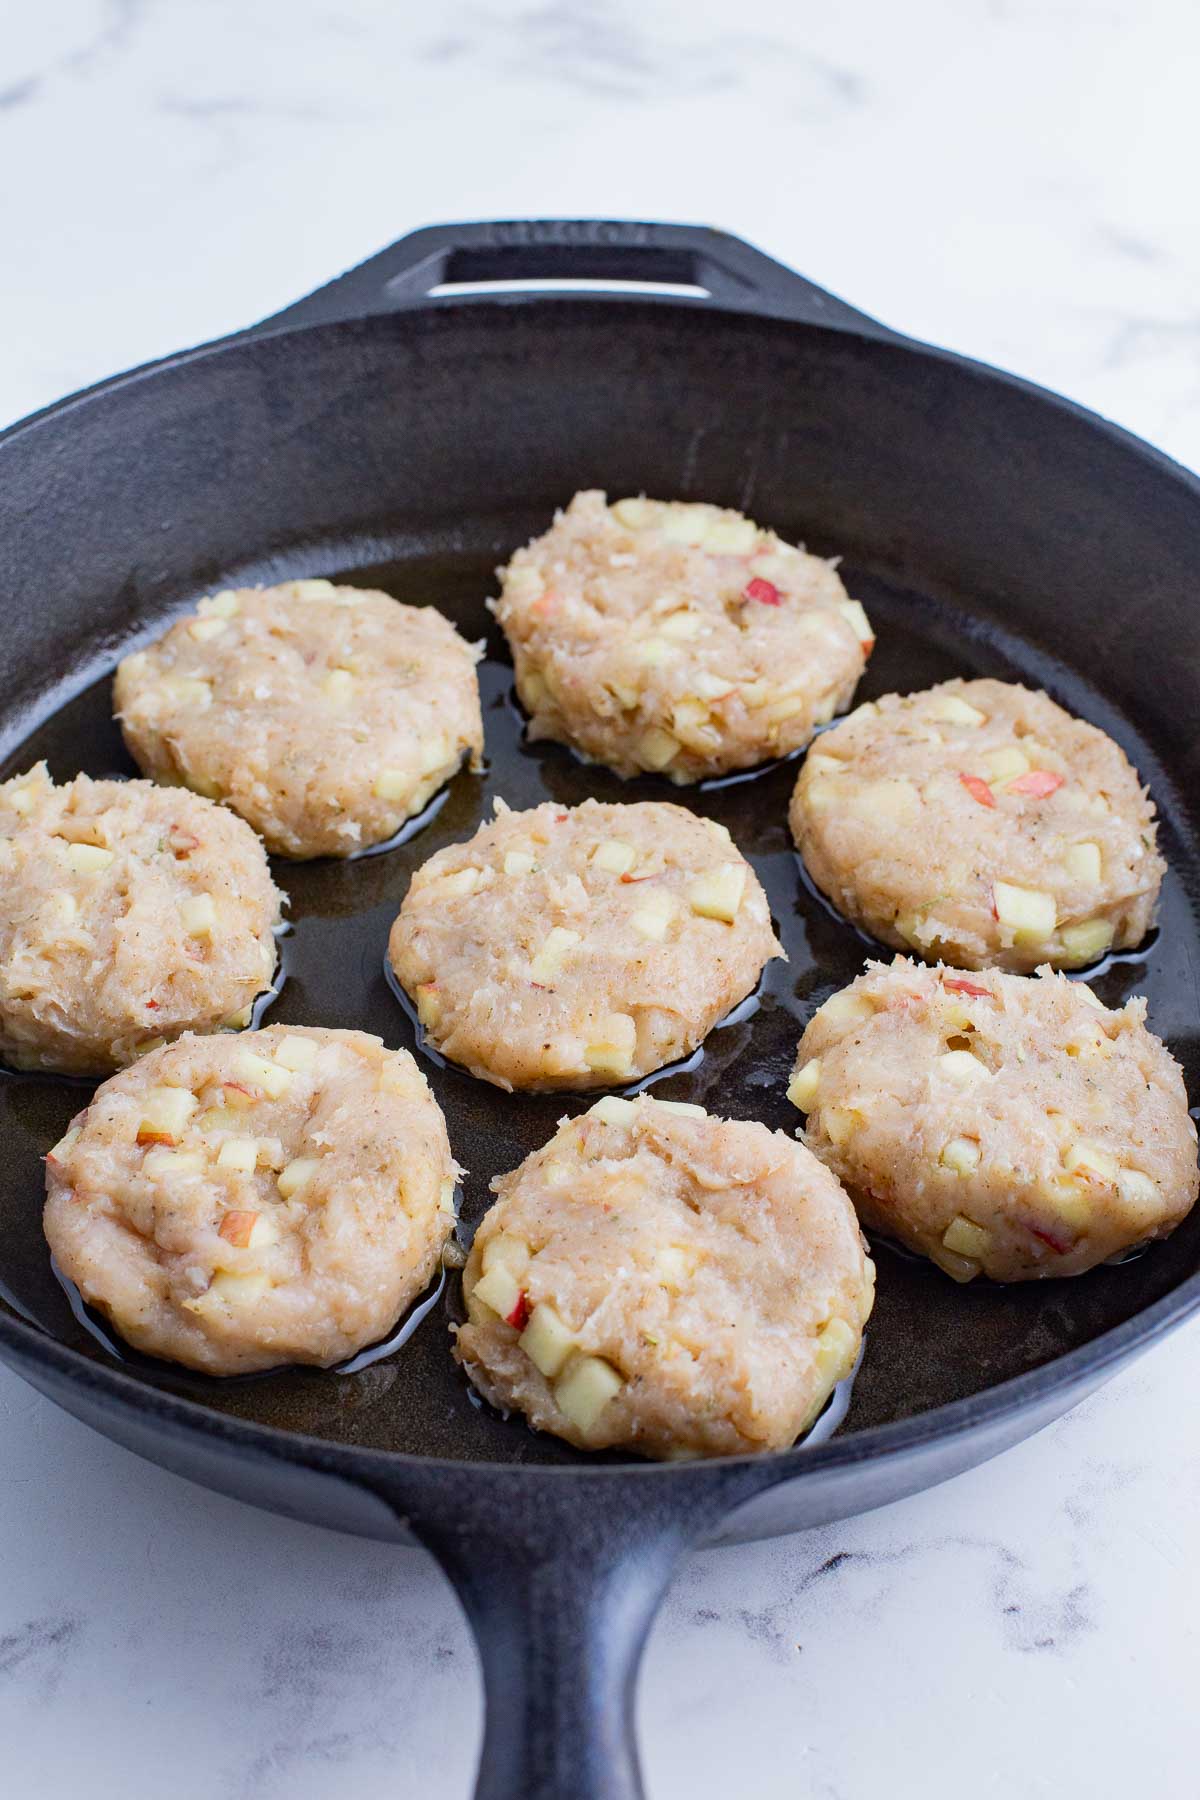 The sausage patties are cooked in a heated cast iron skillet.